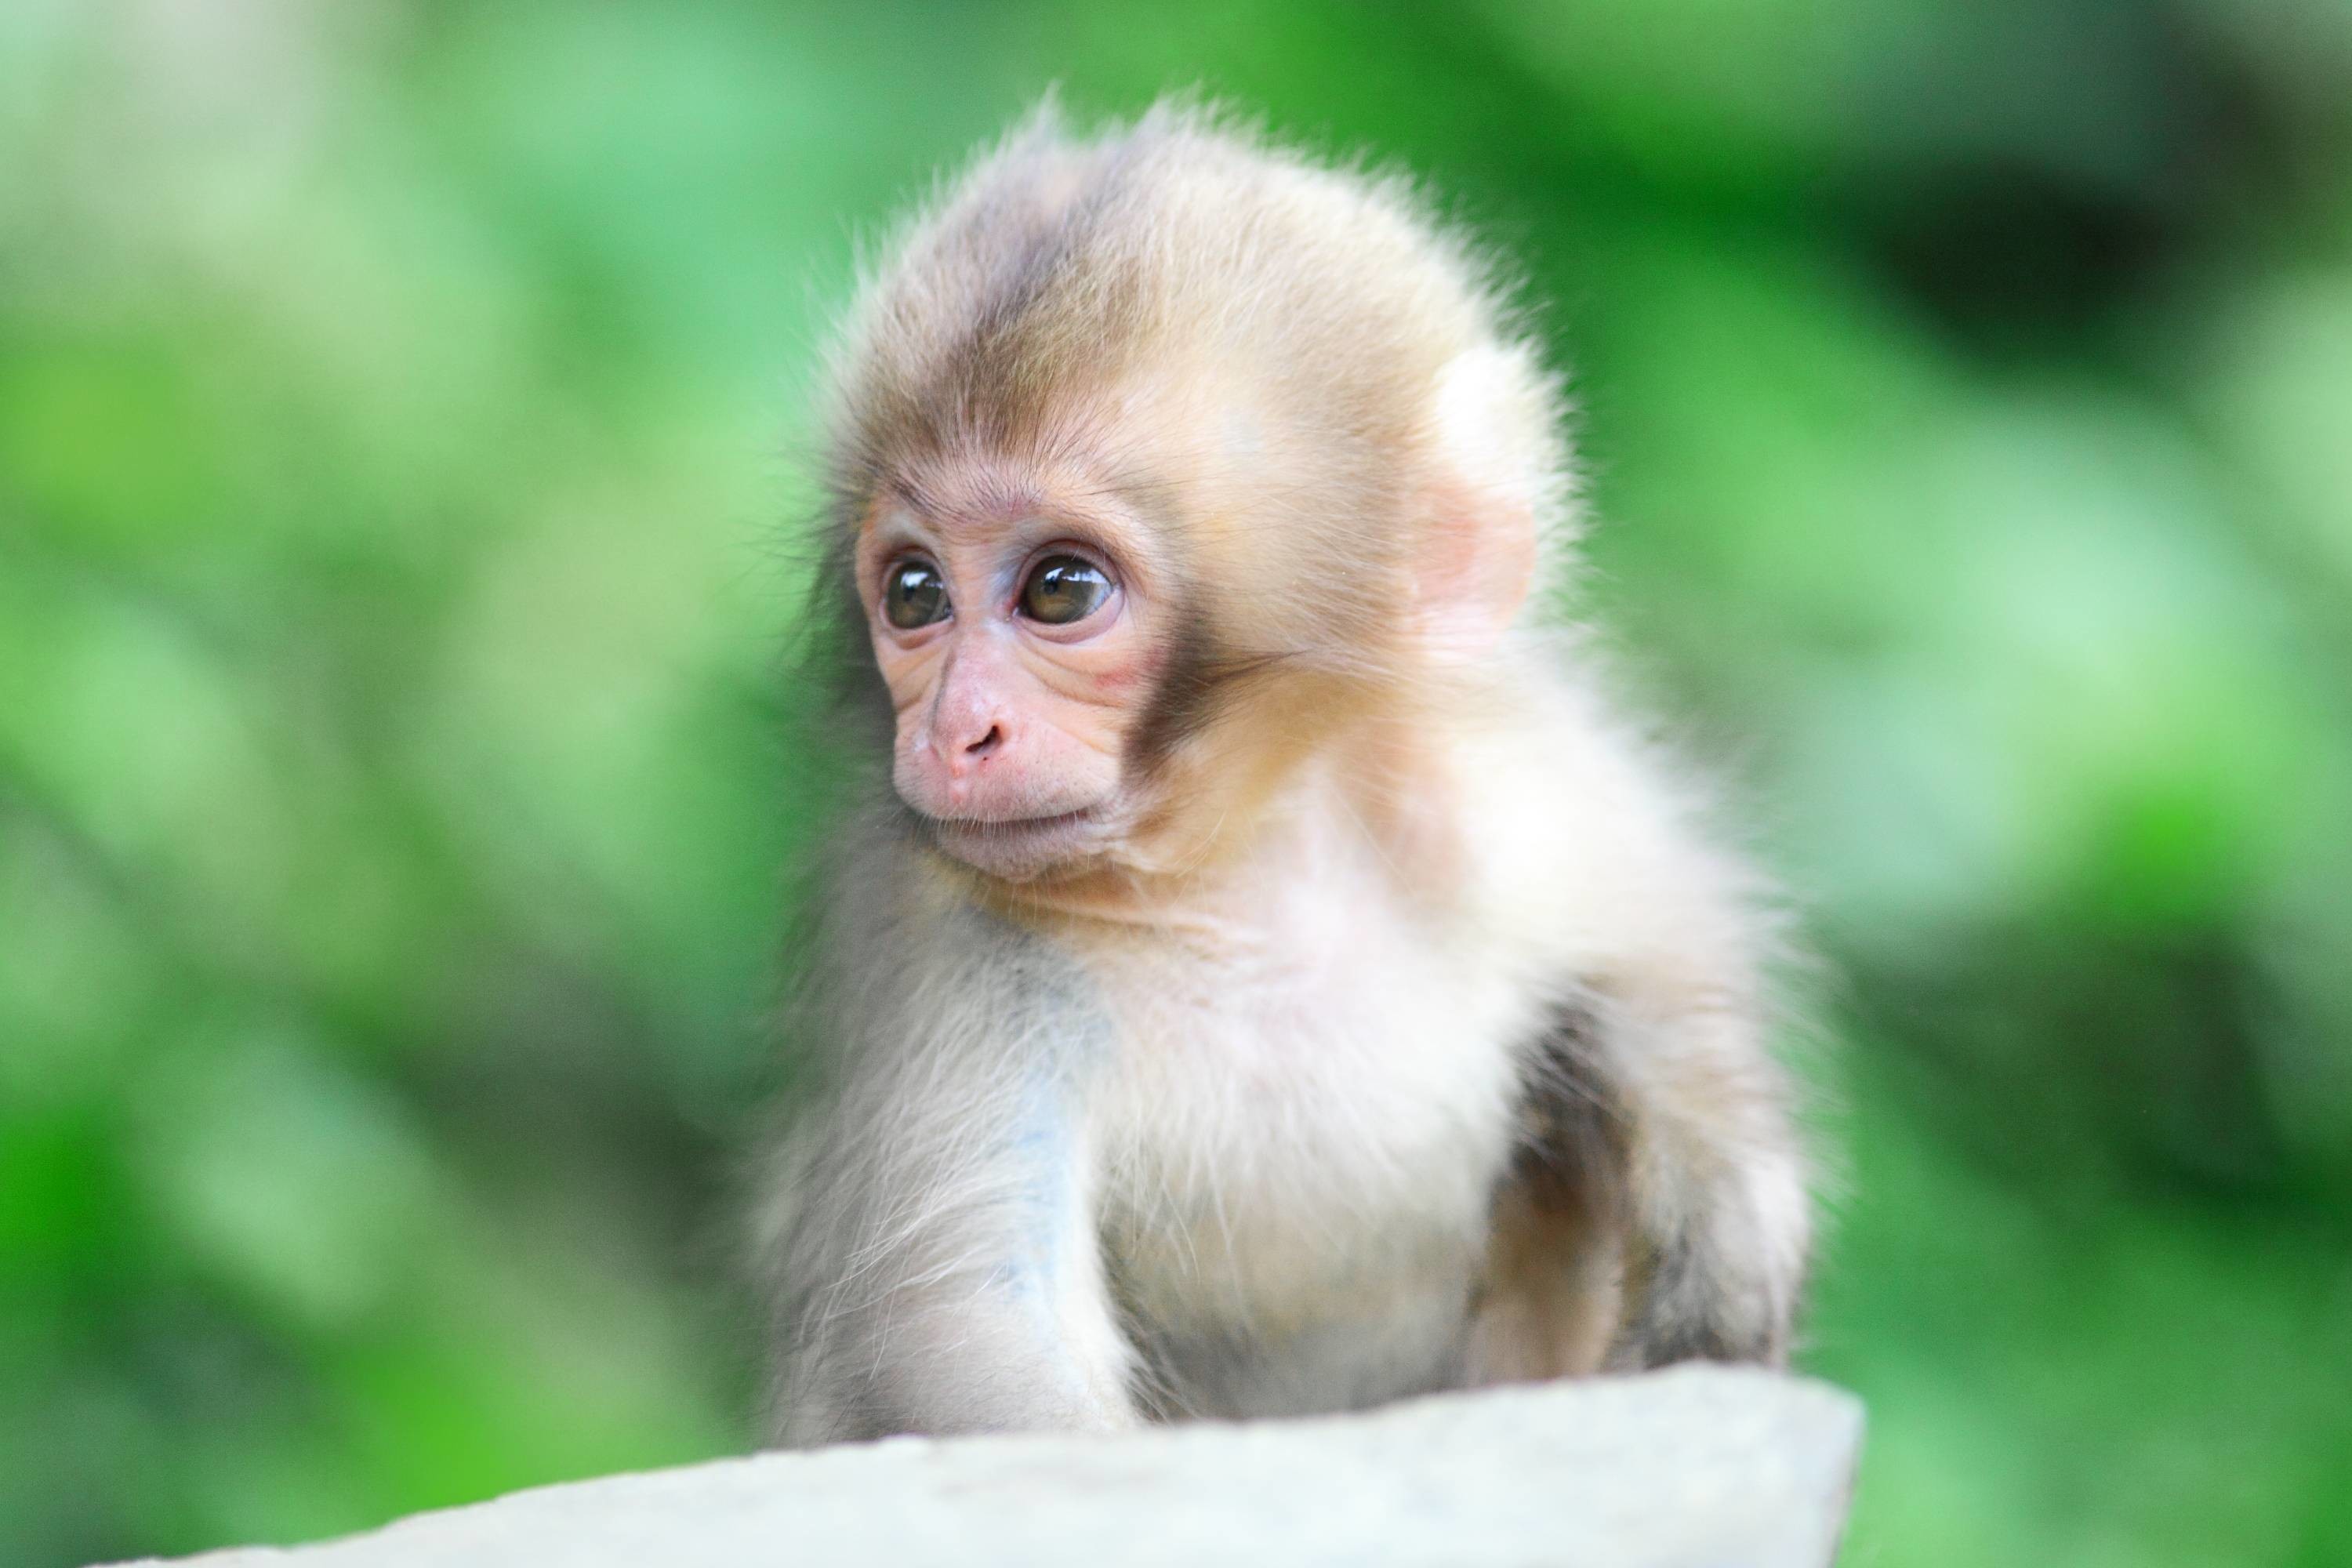 Free Download 66 Baby Monkey Wallpapers On Wallpaperplay 3000x00 For Your Desktop Mobile Tablet Explore 28 Cute Monkeys Wallpapers Cute Monkeys Wallpapers Wallpaper Monkeys Monkeys Wallpaper